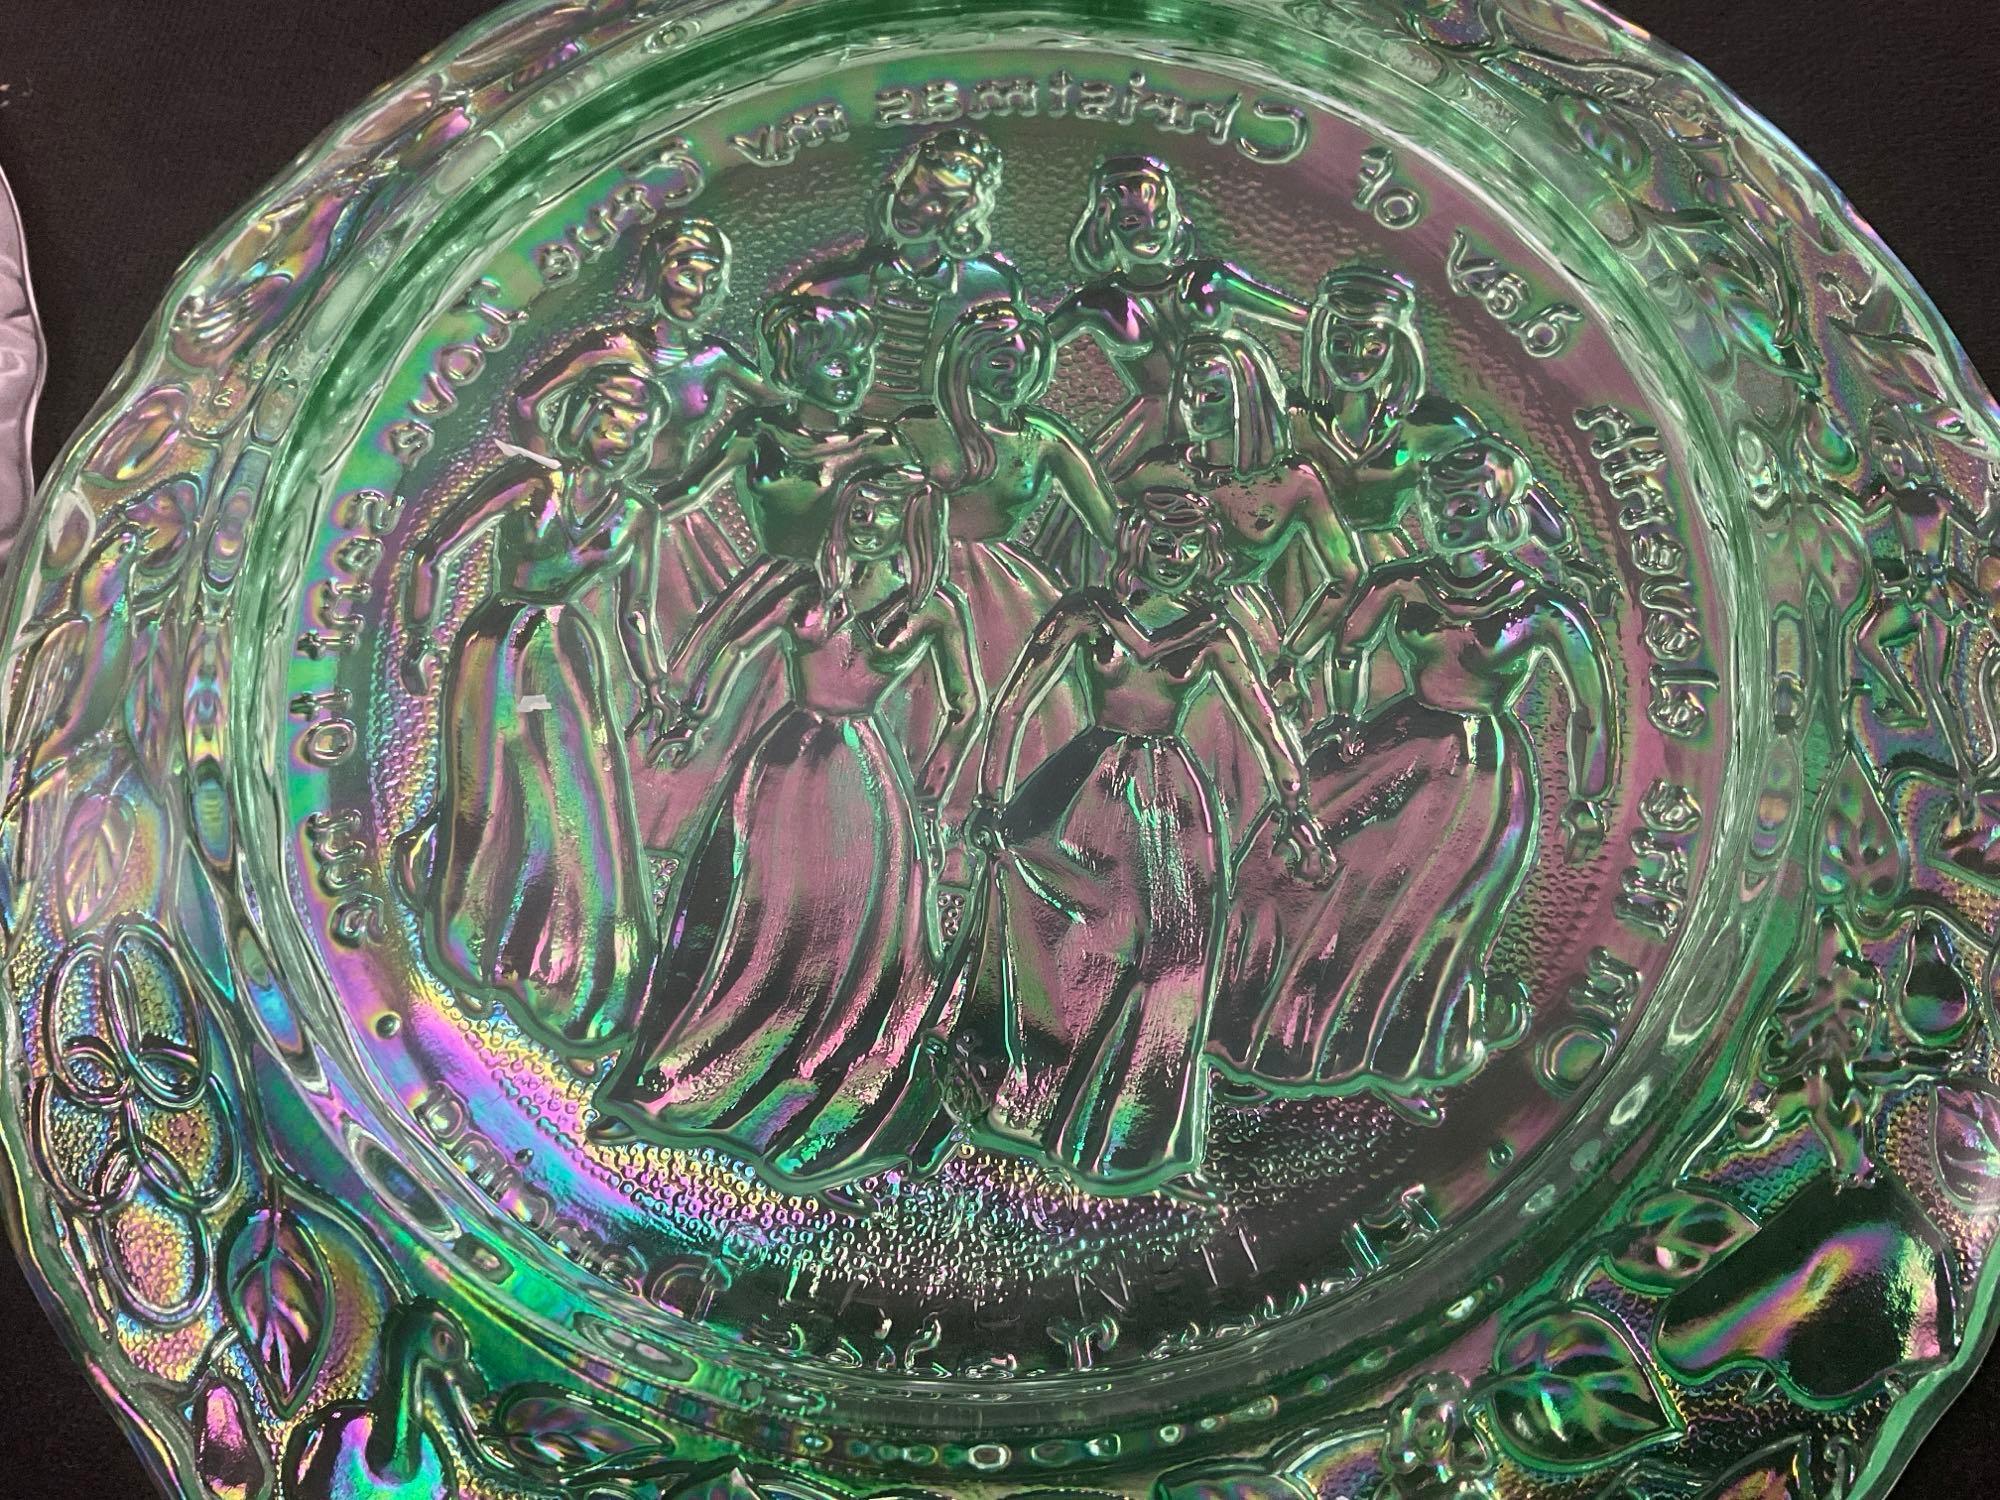 4 Imperial Carnival Glass Plates, 3 Days of Christmas Partridge in a Pear Tree, 2x Eleven, Twelve